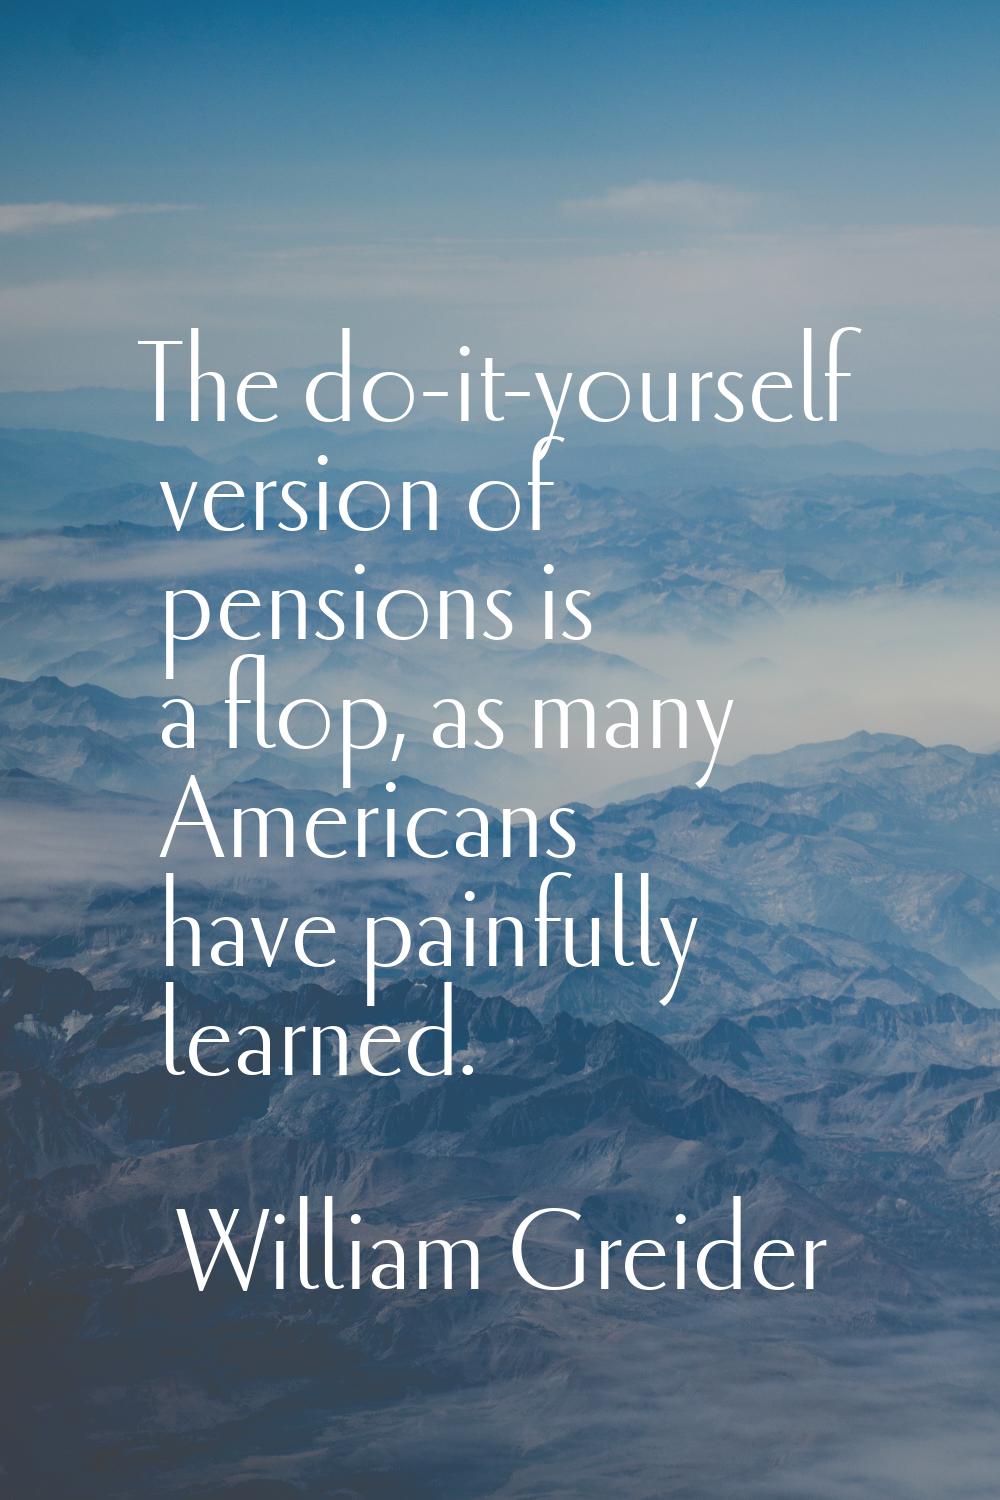 The do-it-yourself version of pensions is a flop, as many Americans have painfully learned.